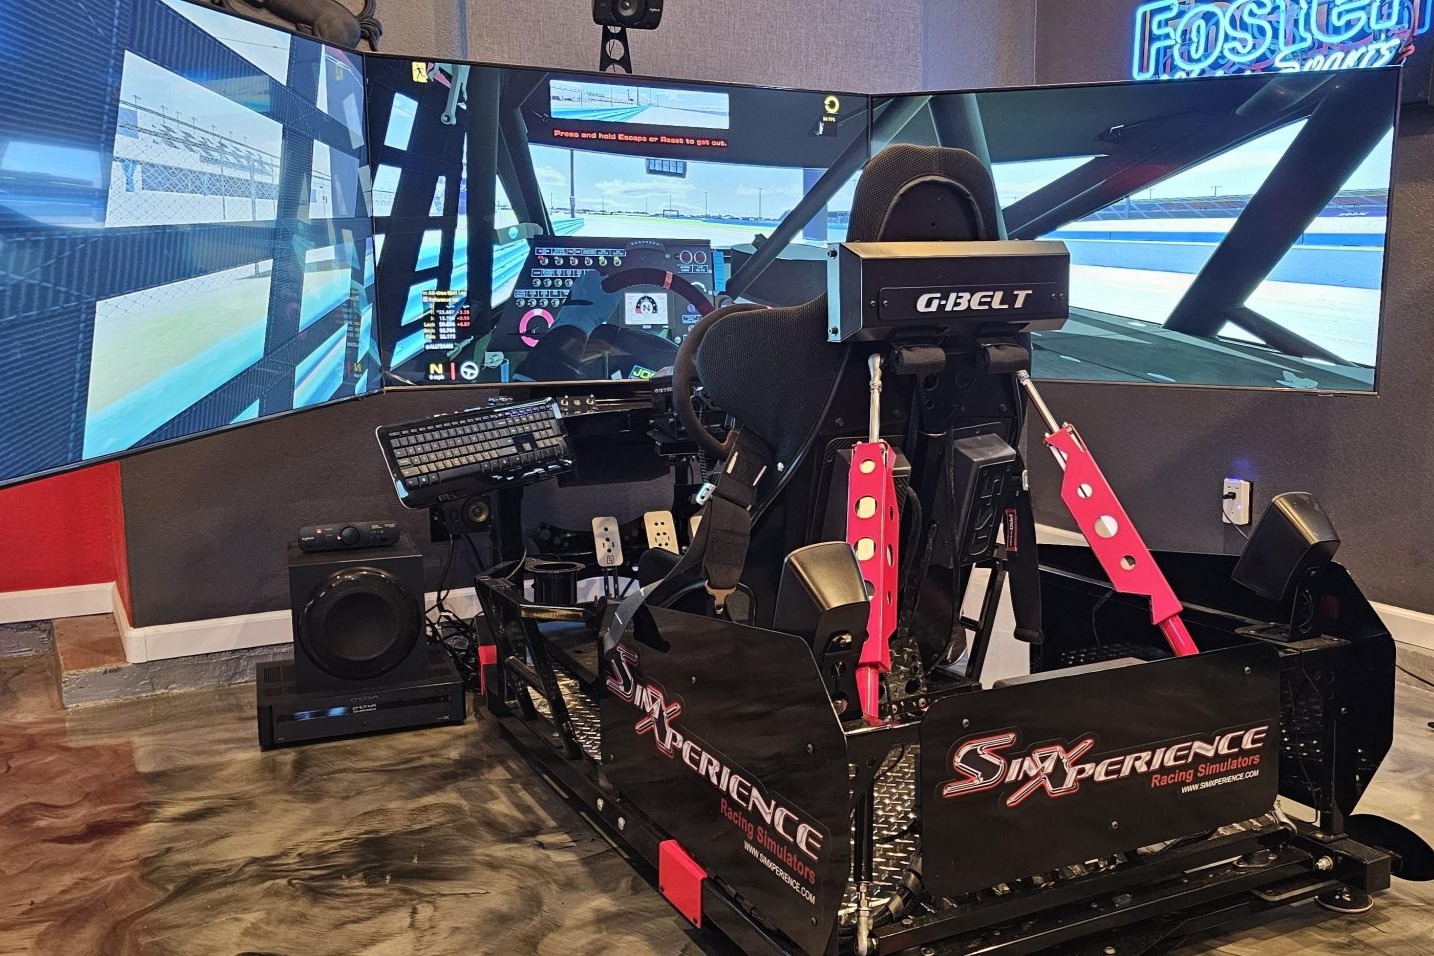 Used SimXperience Stage 5 Full Motion Racing Simulator Review